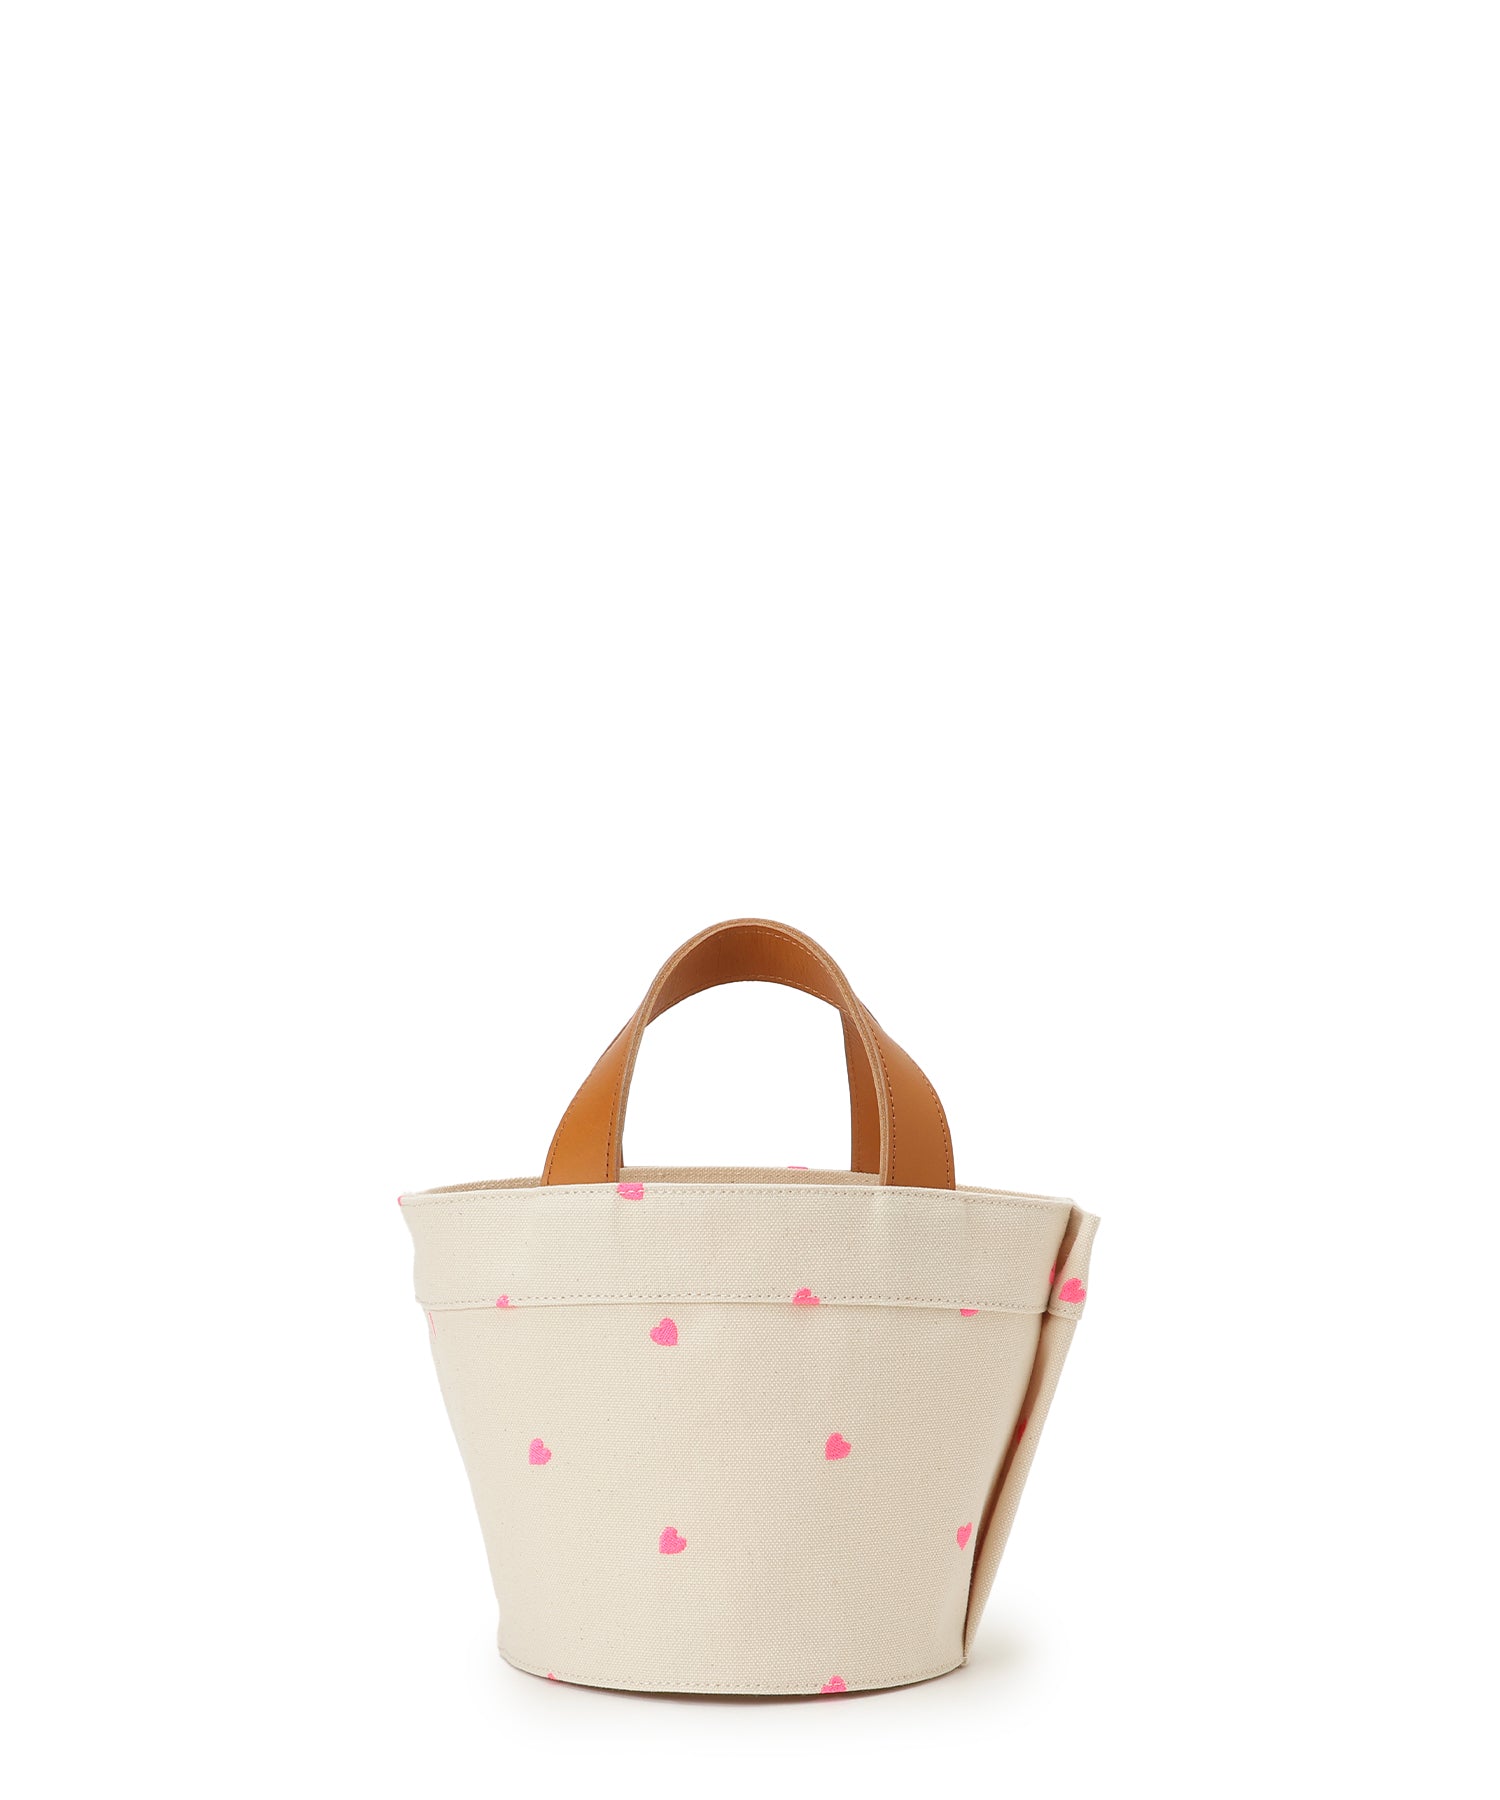 WEB限定] Canvas tote XS (heart embroidery)— LUDLOW STORE